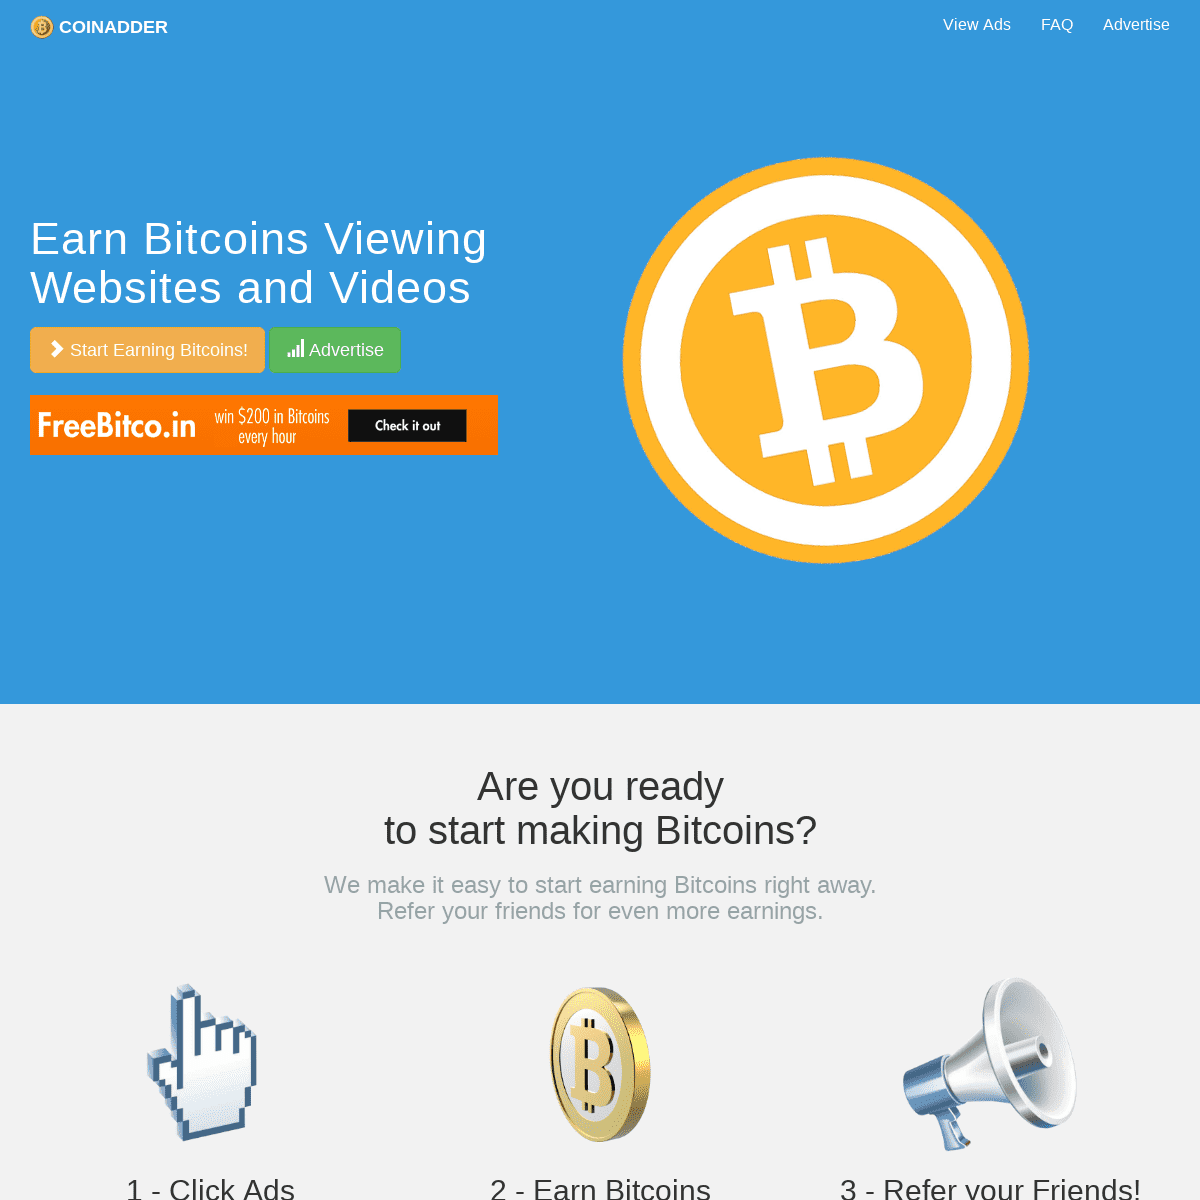 CoinAdder.com - #1 Bitcoin PTC site to Earn BTC Viewing Ads